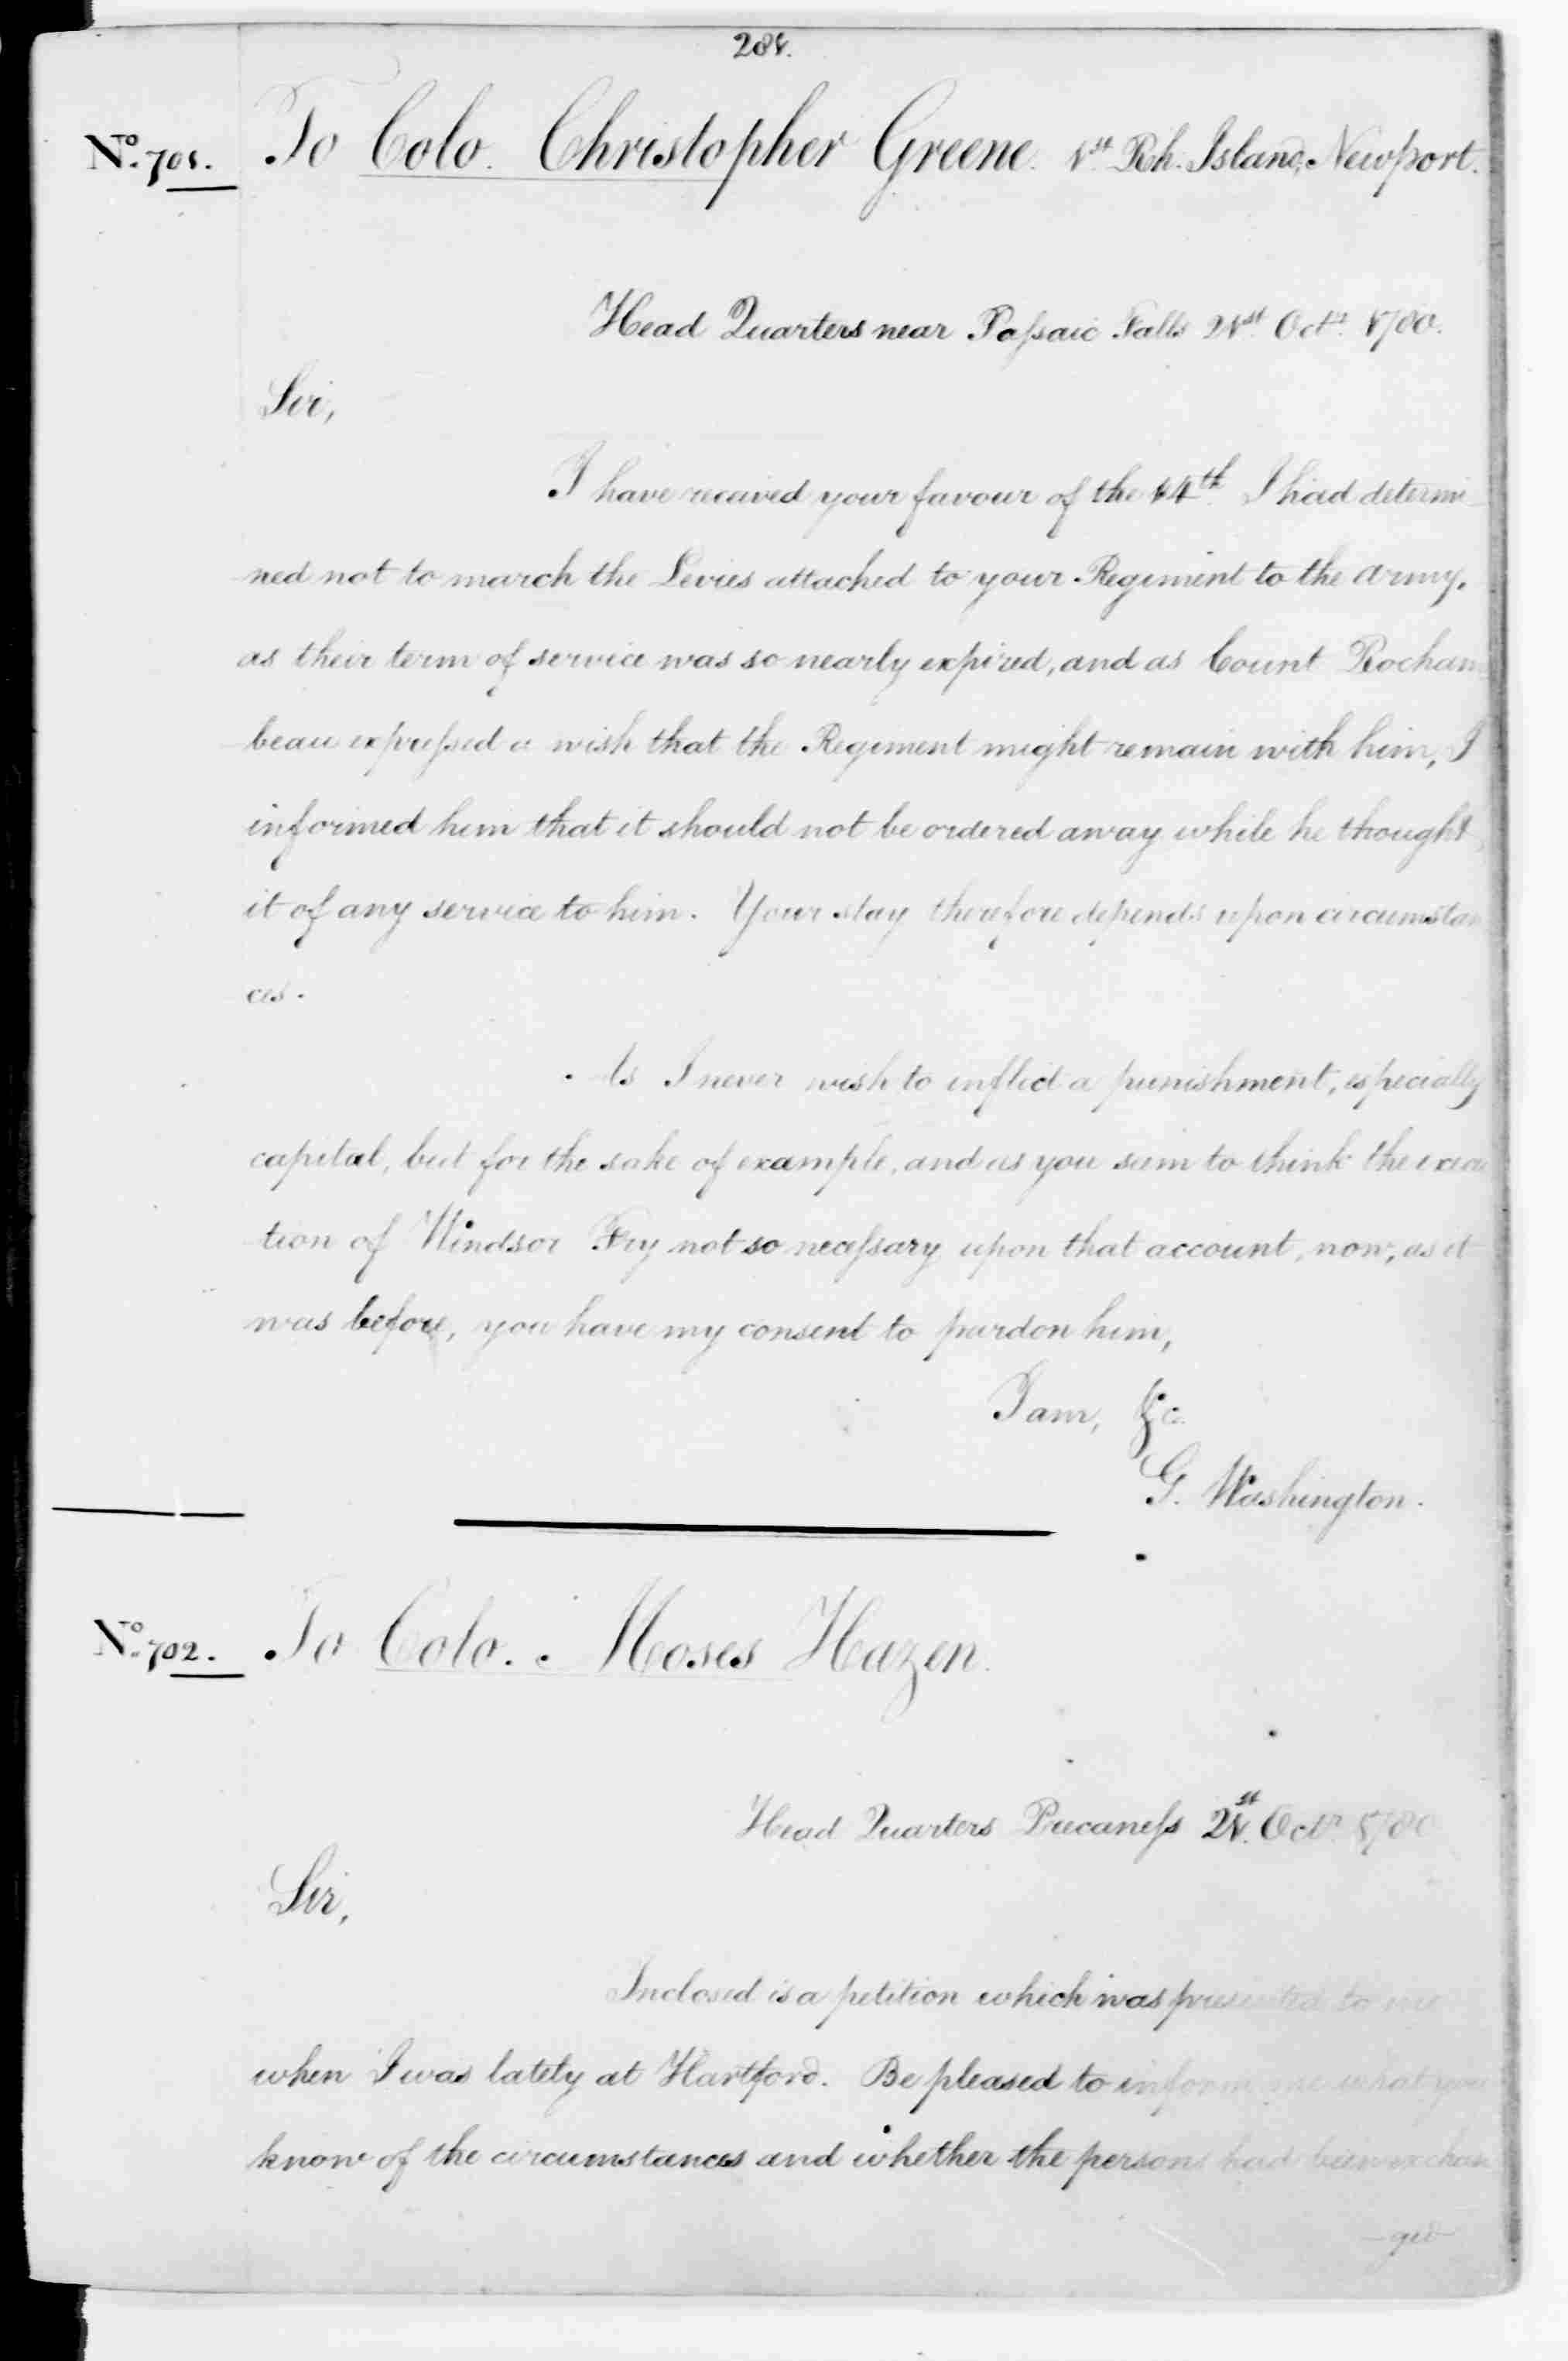 Letter from Washington to Colonel Christopher Greene giving consent to pardon Winsor Fry.